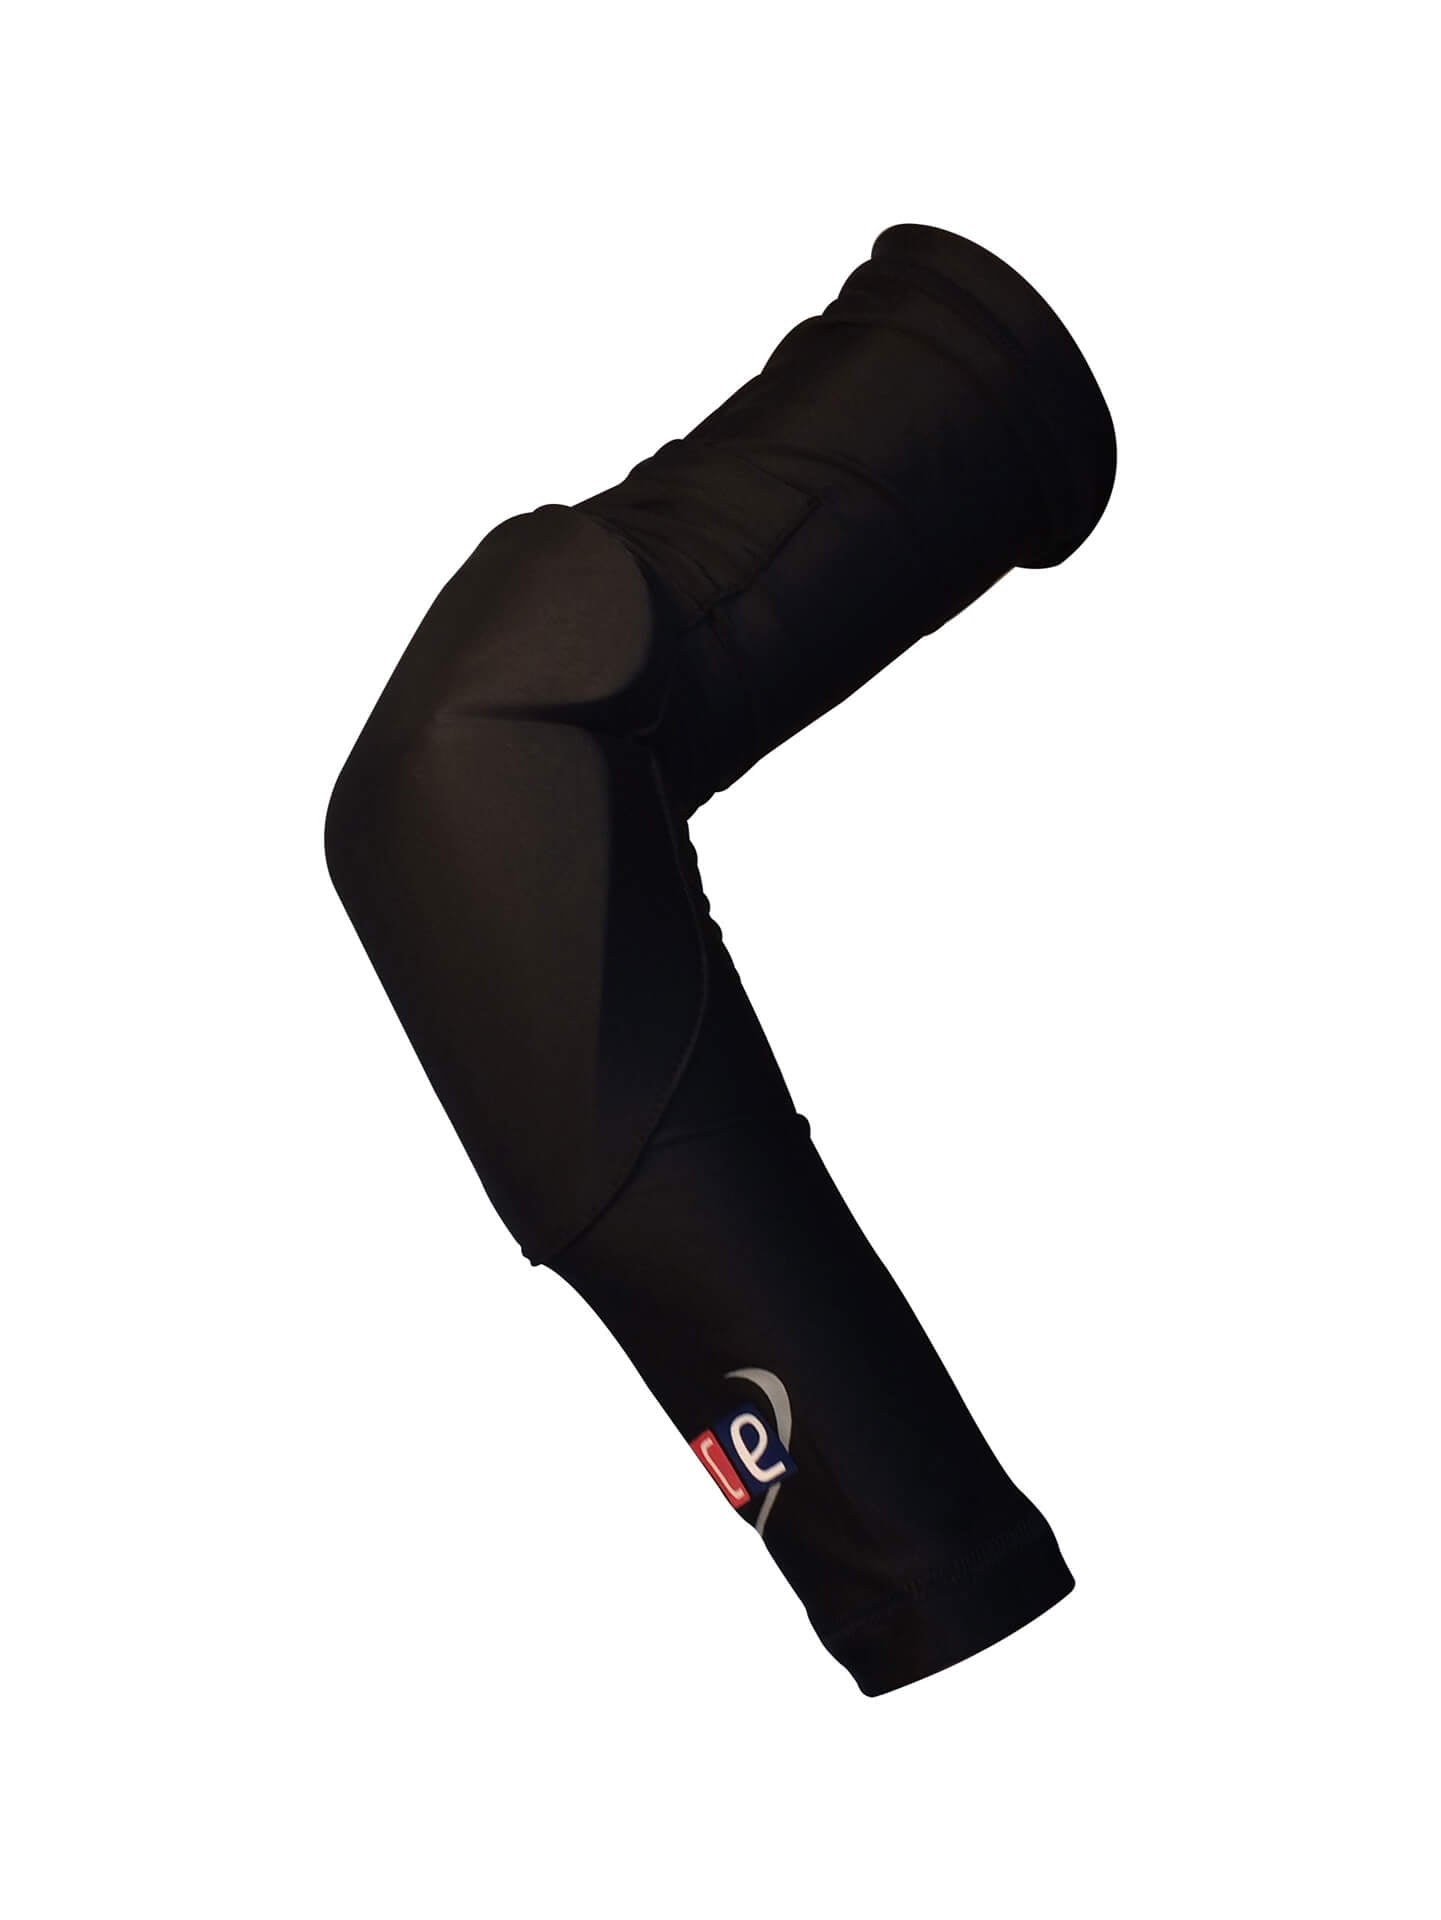 Elbow Arm Protection - High Density Foam Protection Compression Sleeves Black